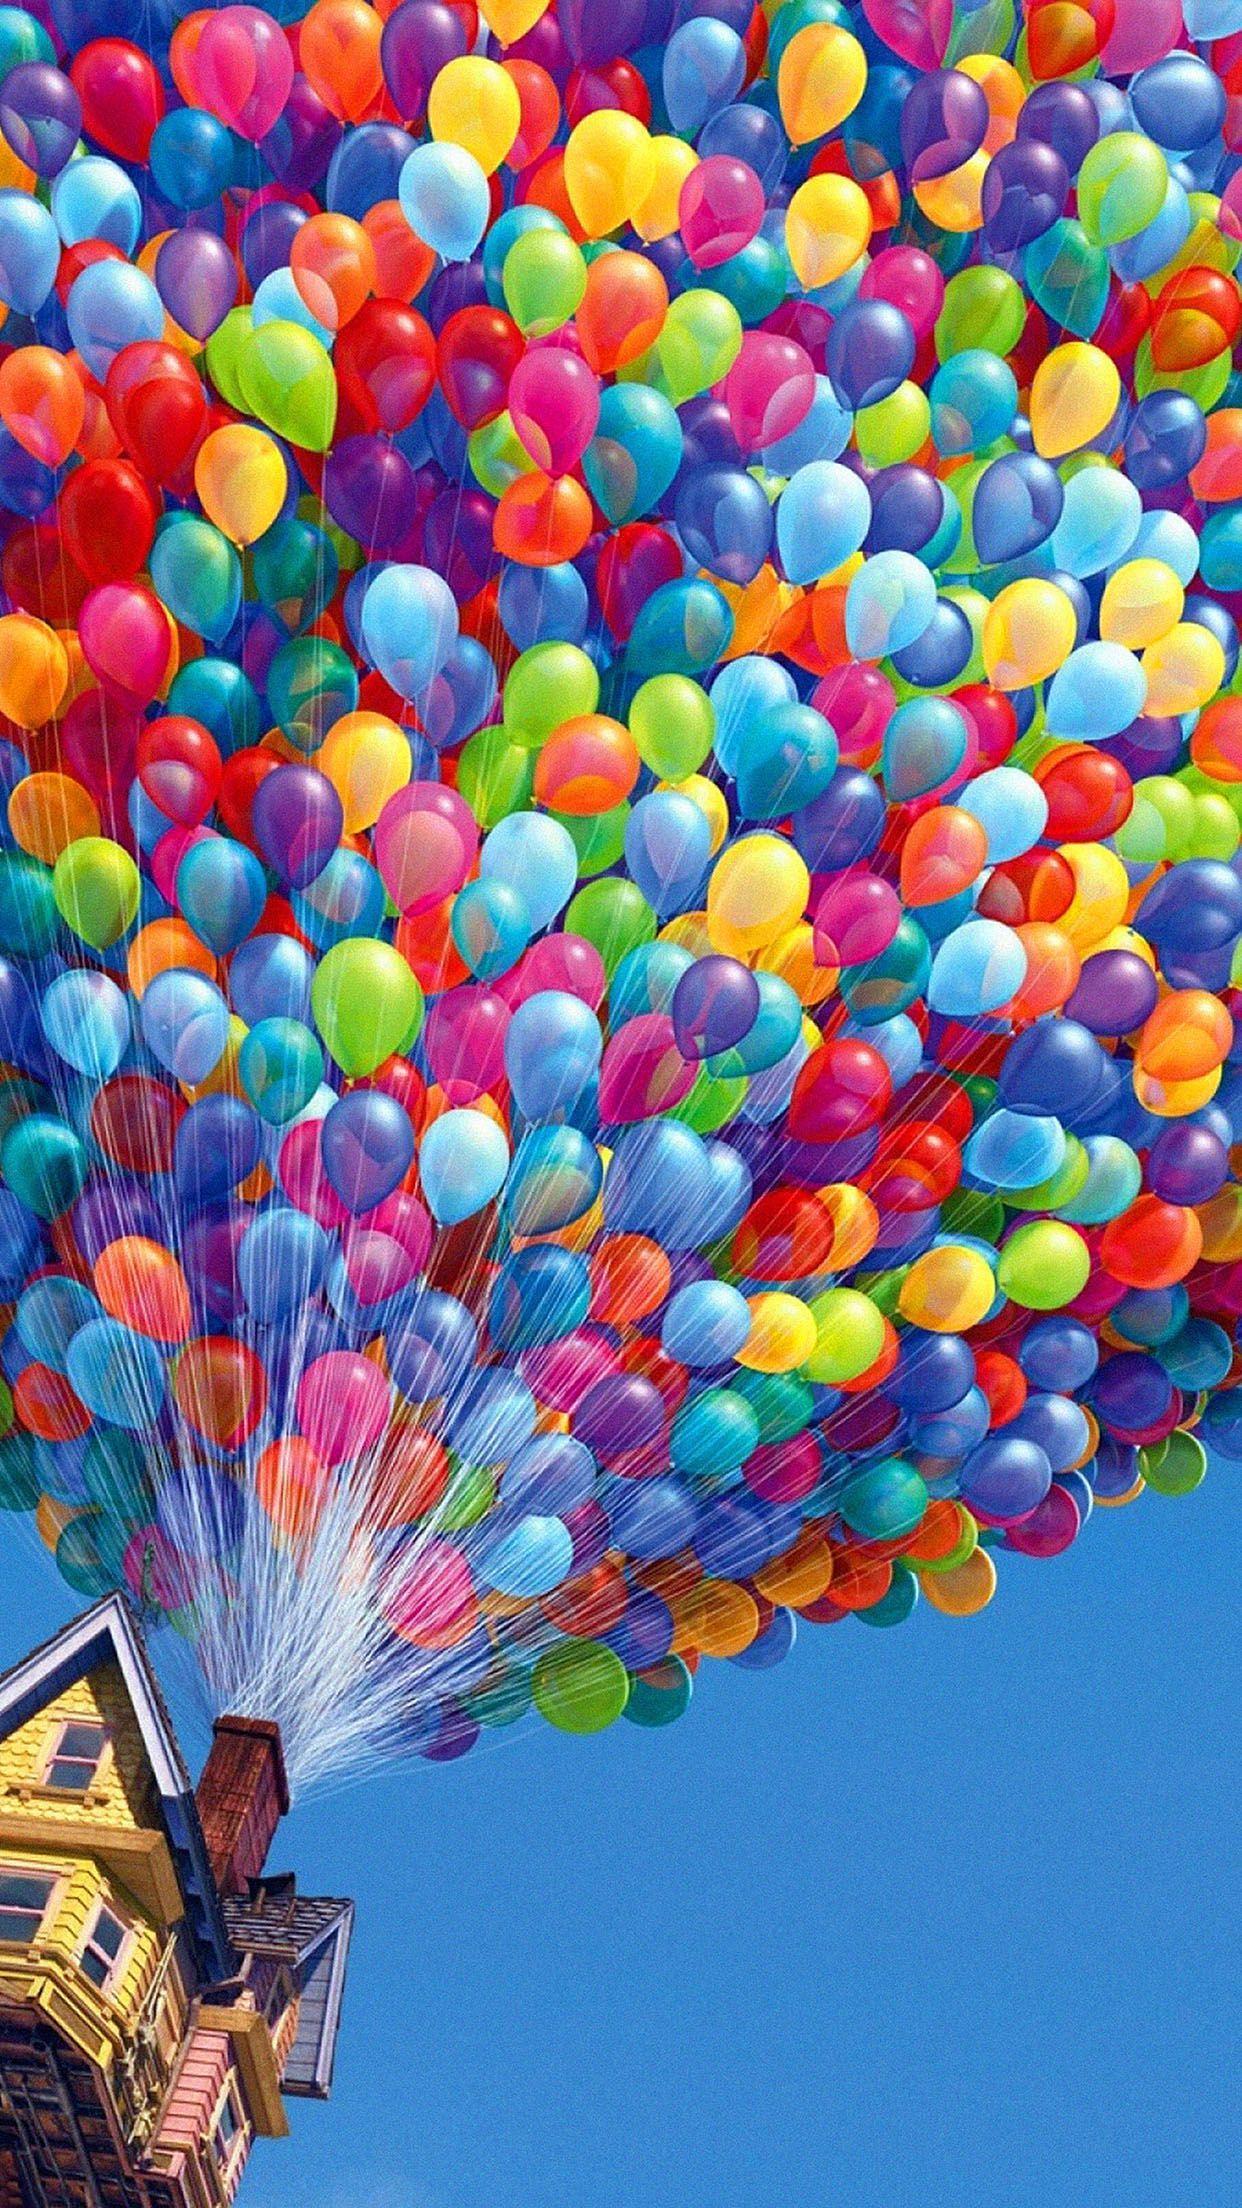 UP Movie Balloons House wallpaper Gallery